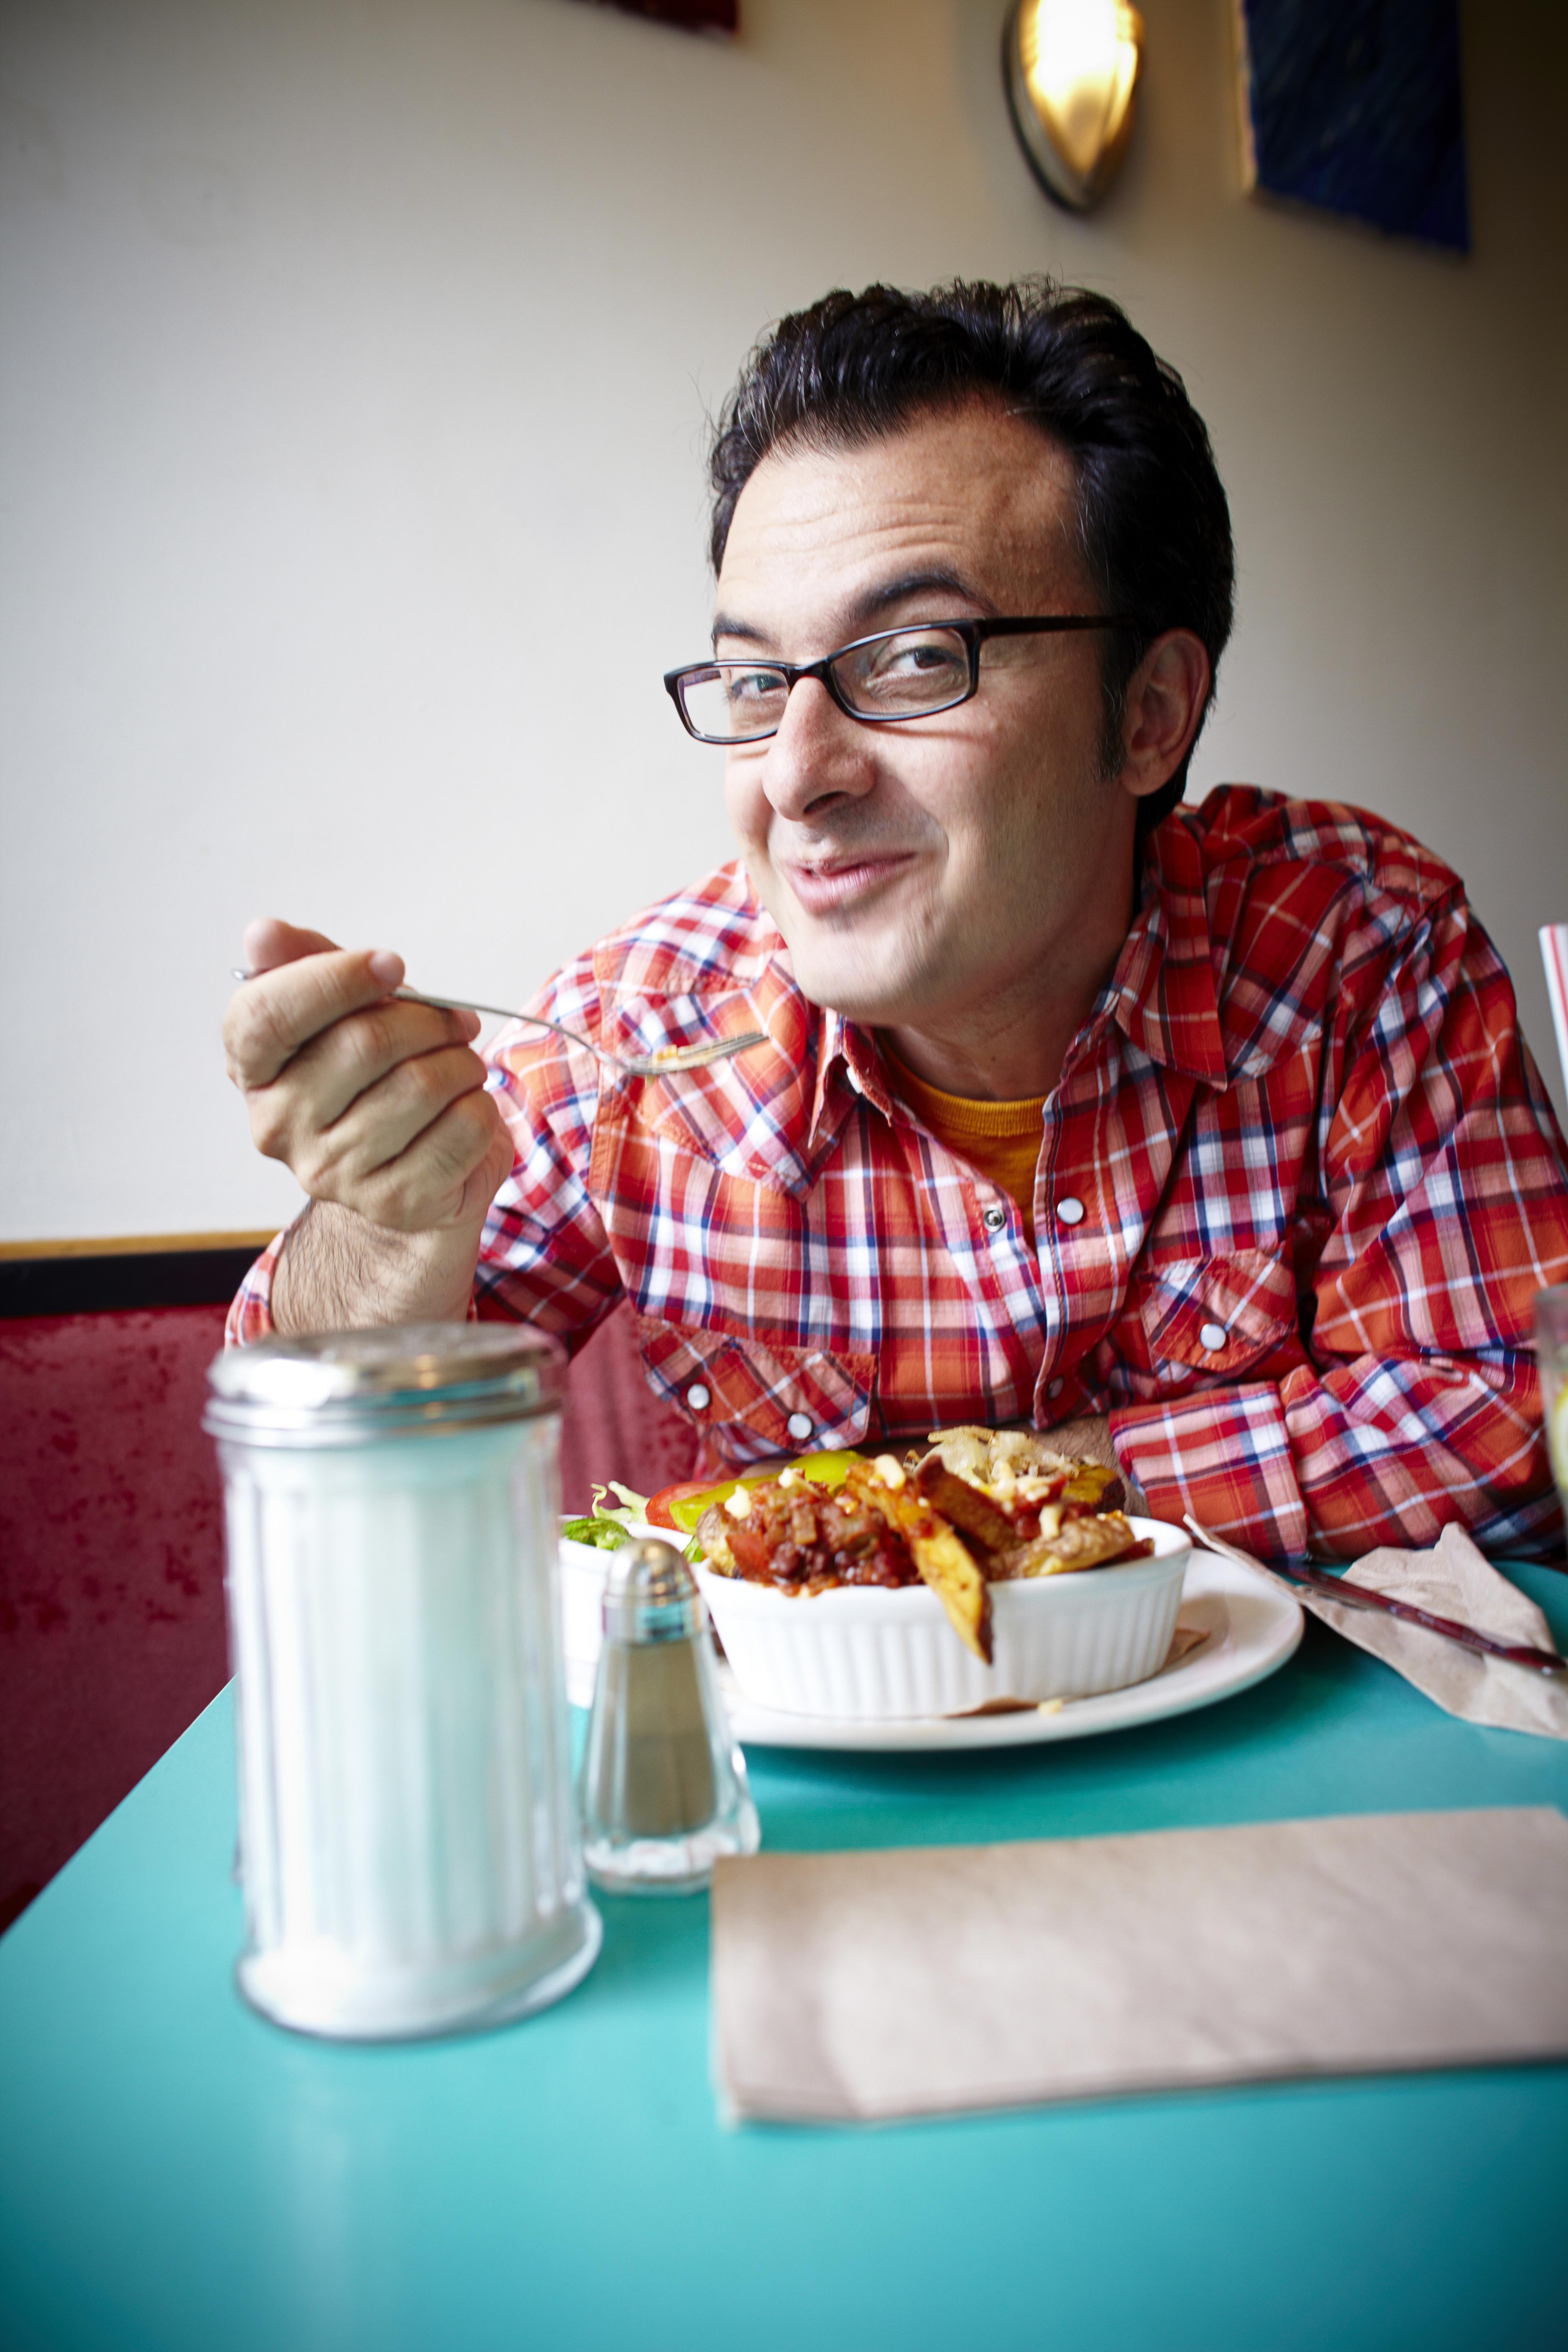 Public relations for Food Network Canada's 'You Gotta Eat Here' with John Catucci